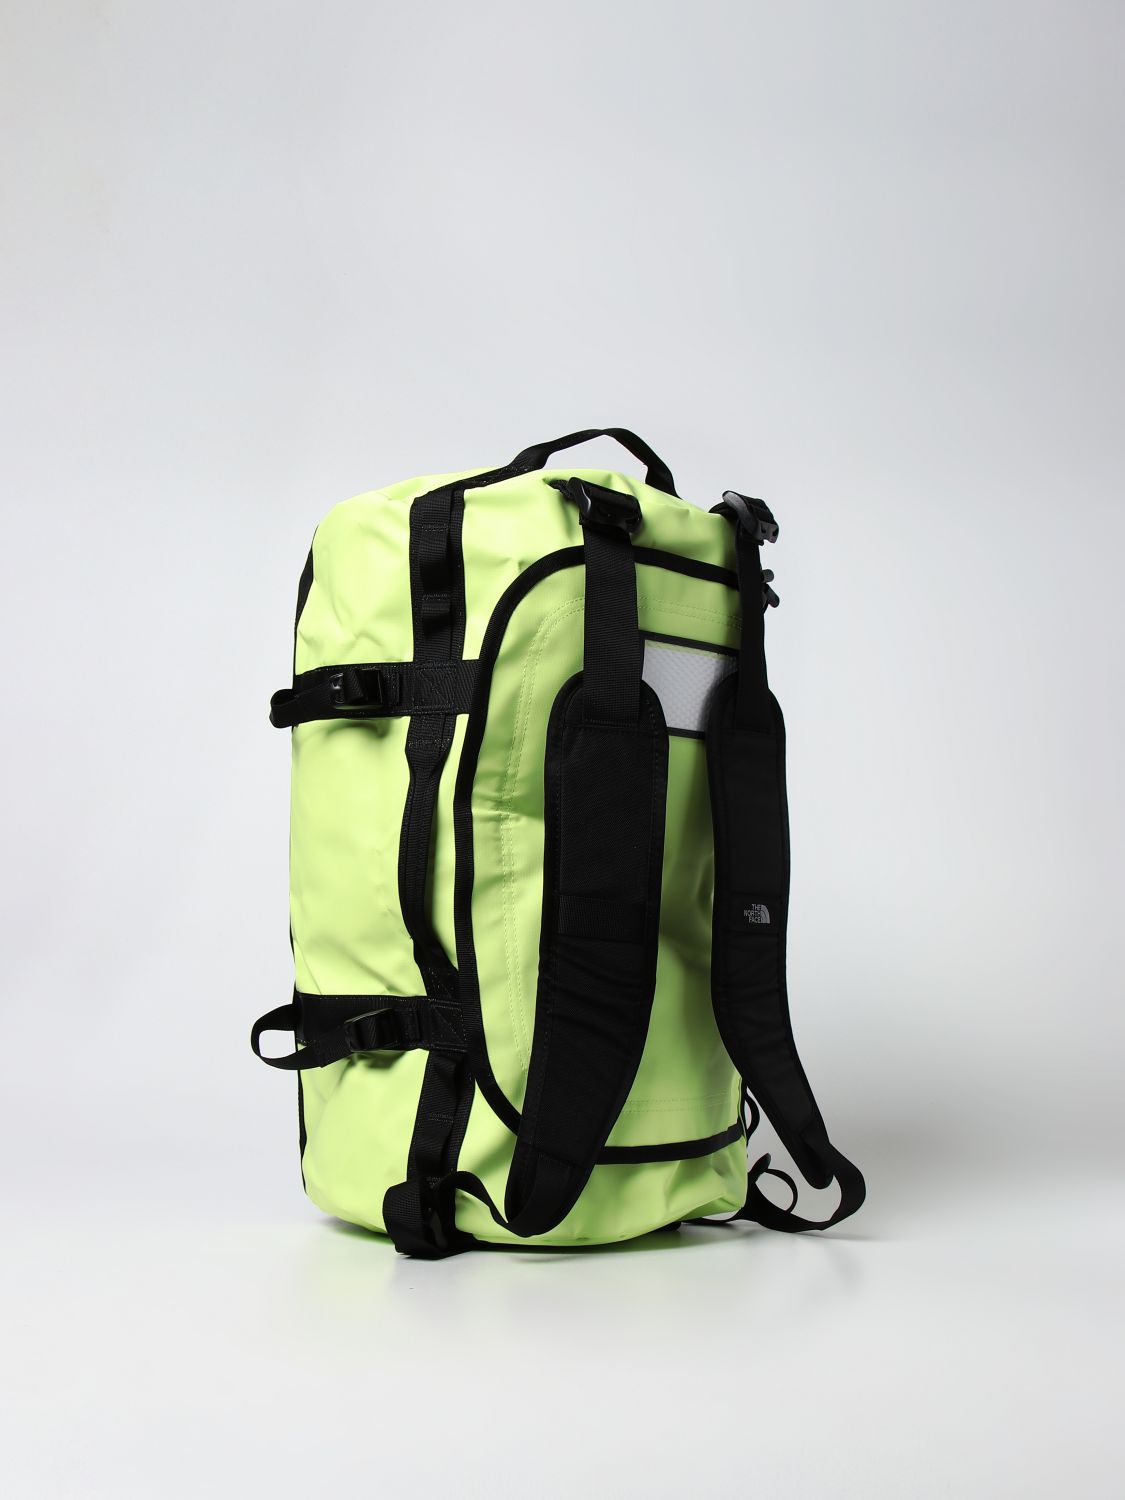 Backpack The North Face: The North Face Base Camp Duffel S rucksack in technical fabric green 2